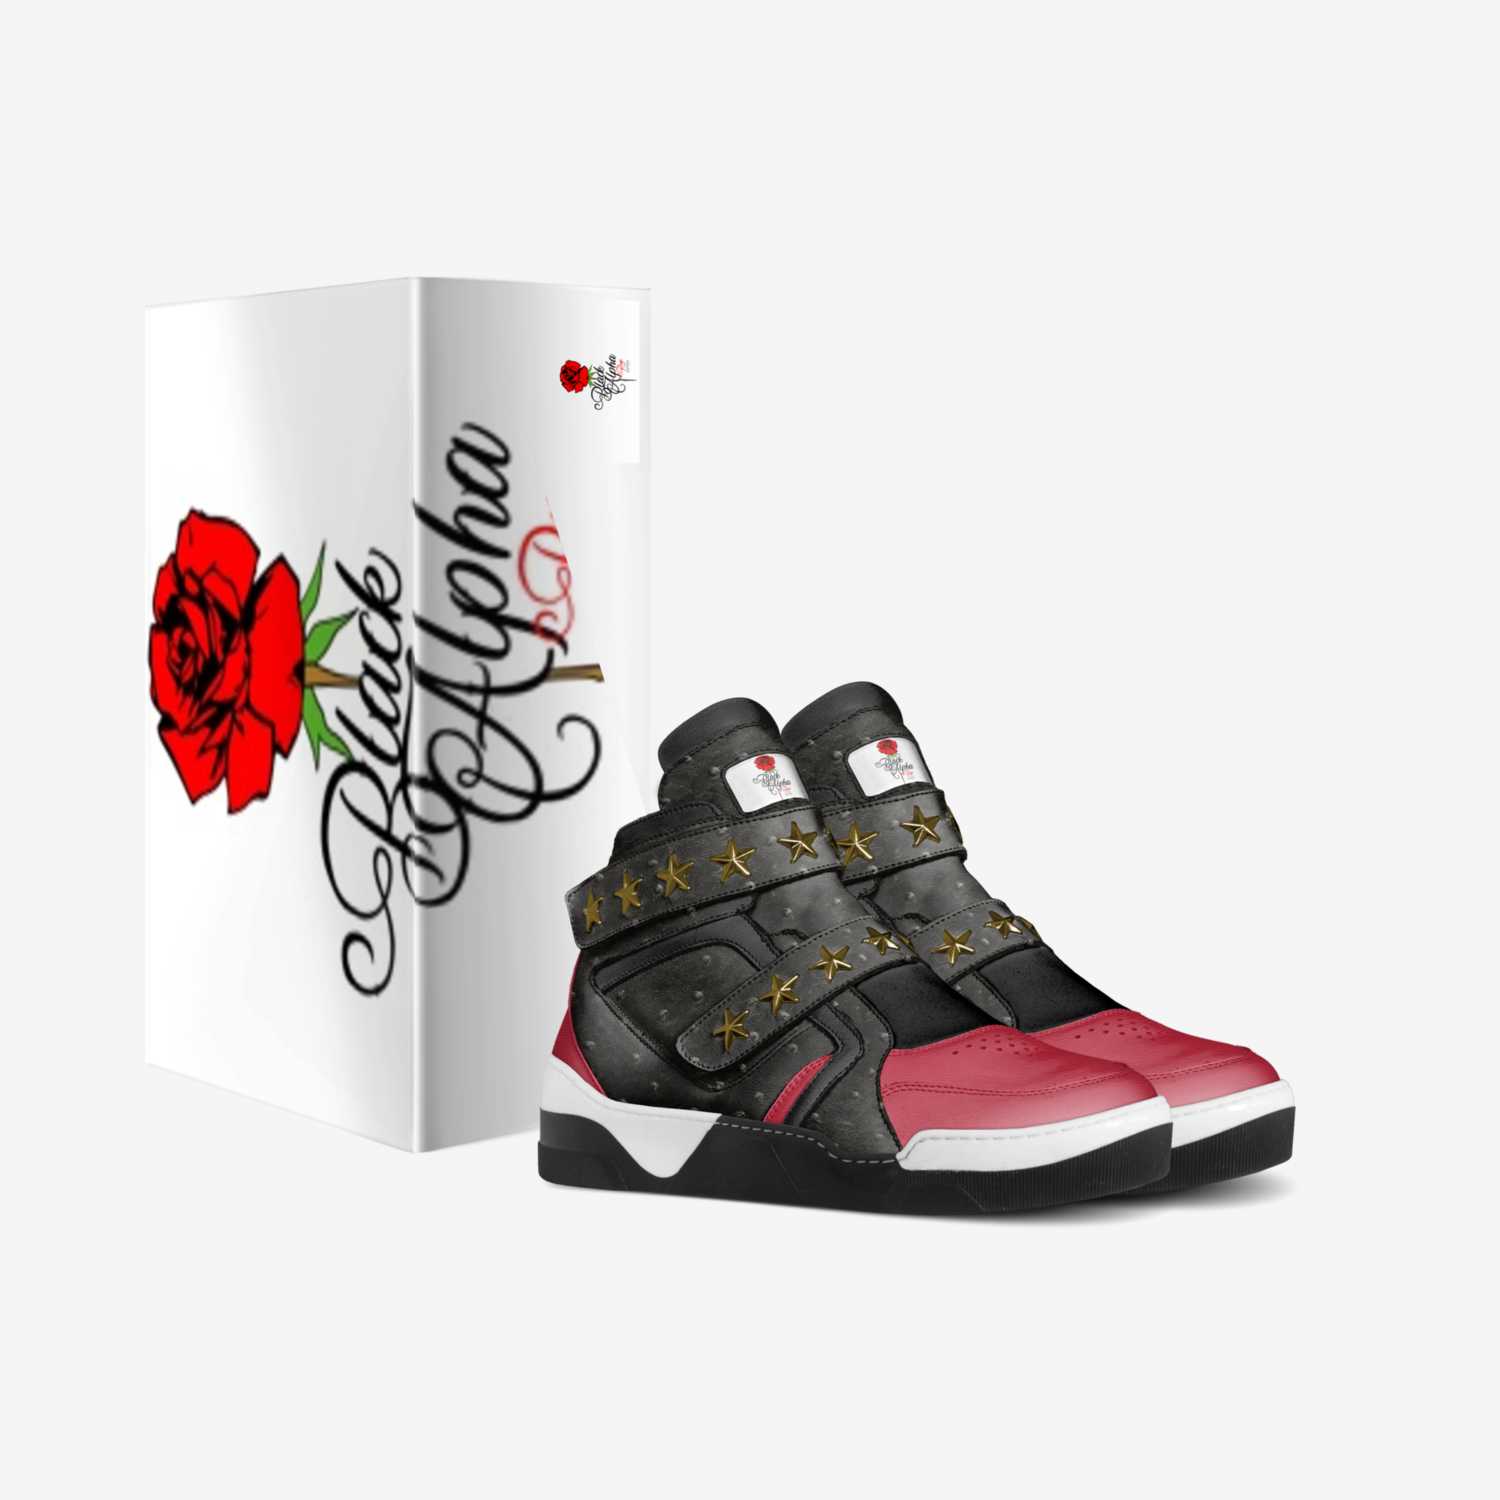 BLACK-ALPHA..ROSE  custom made in Italy shoes by Terrell James | Box view